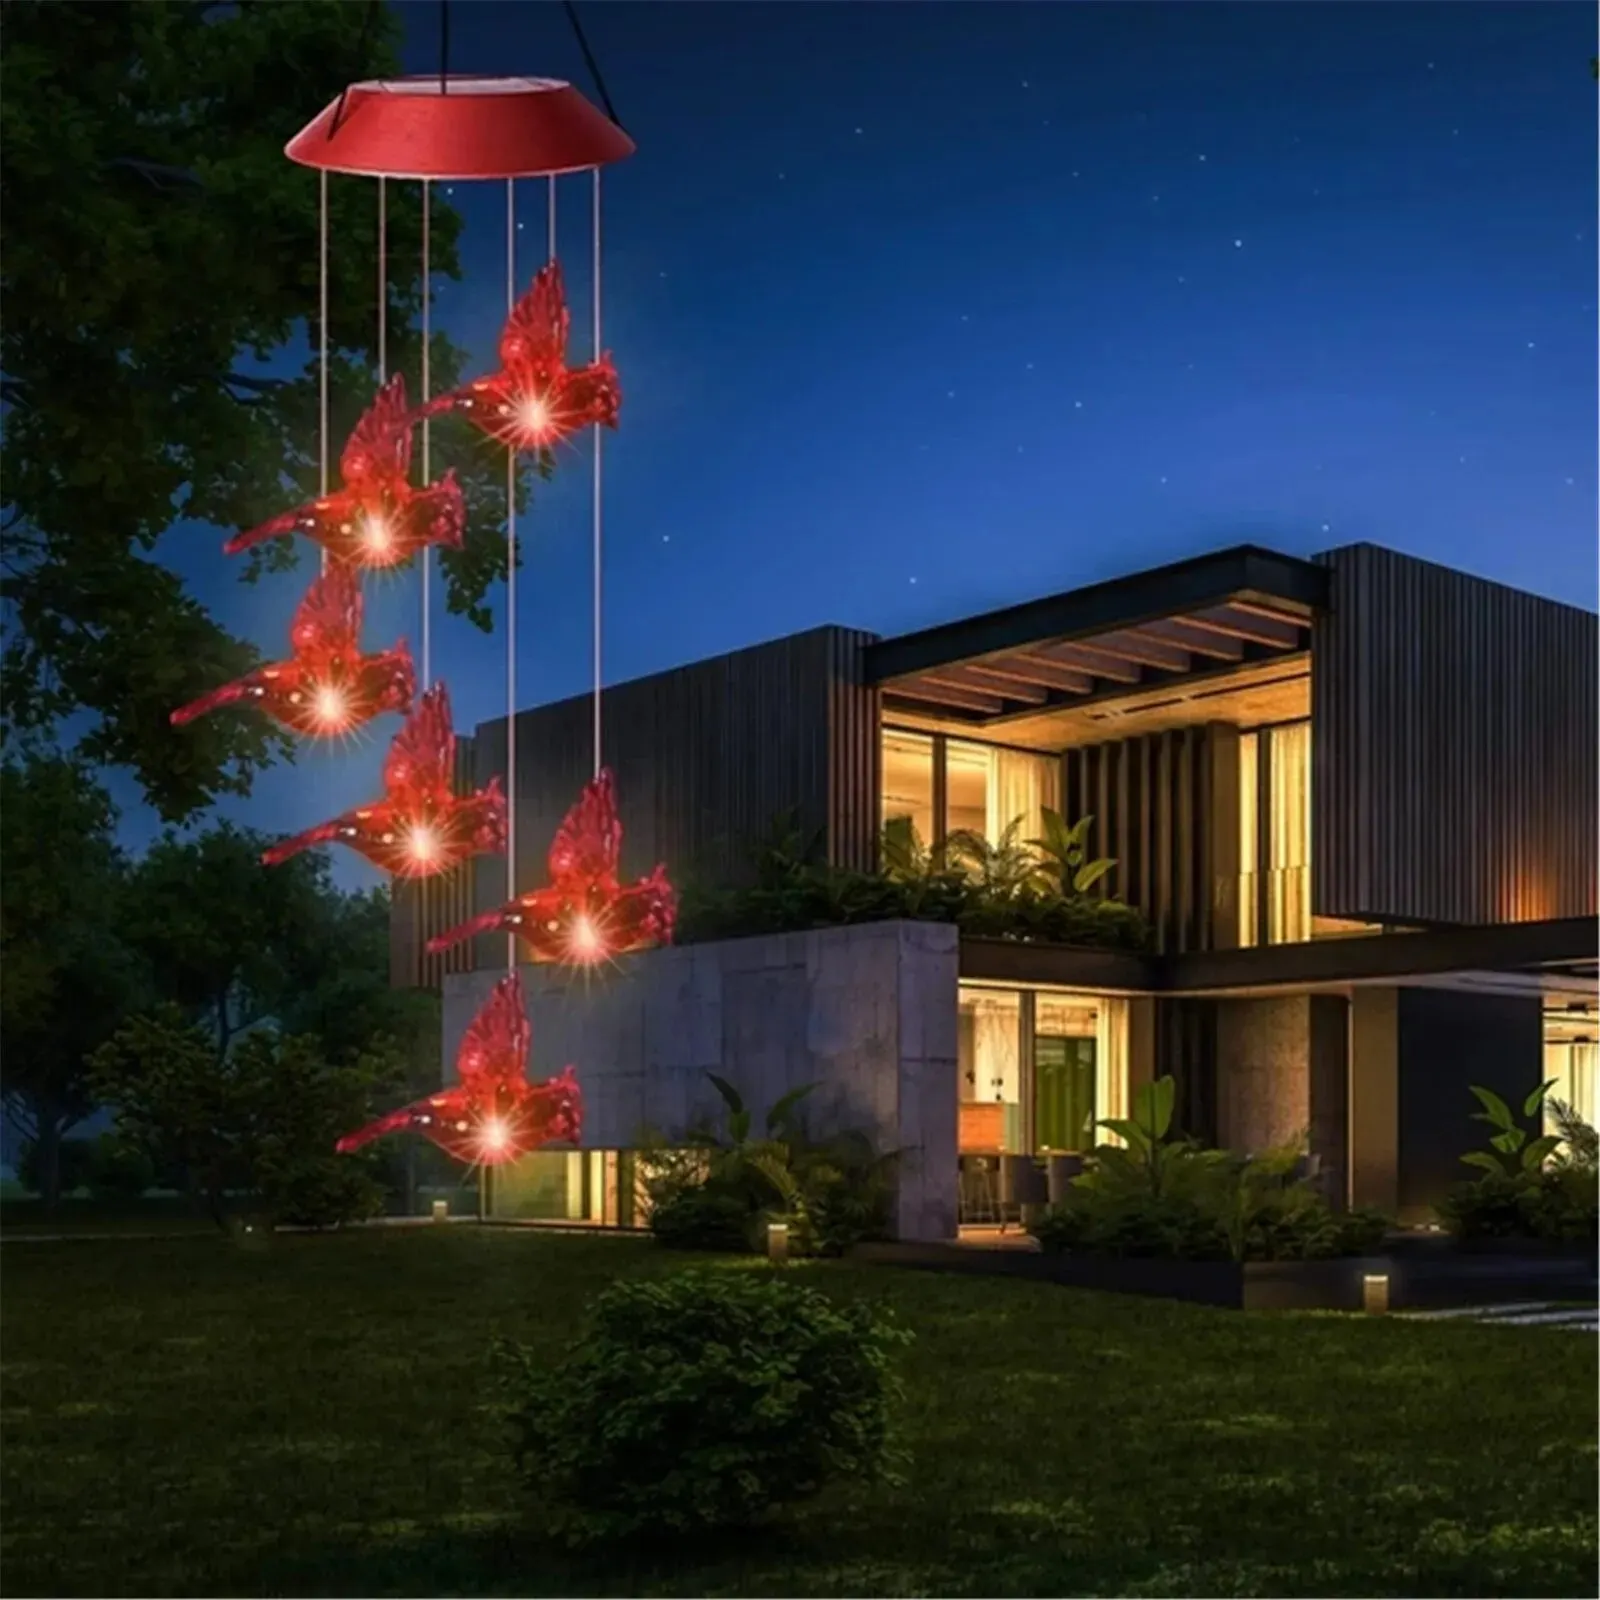 

Powered LED Red Bird Wind Chime Color-Changing Lighting Garden Decor Outdoor Courtyard Porch Lights Decoratoin Lamps